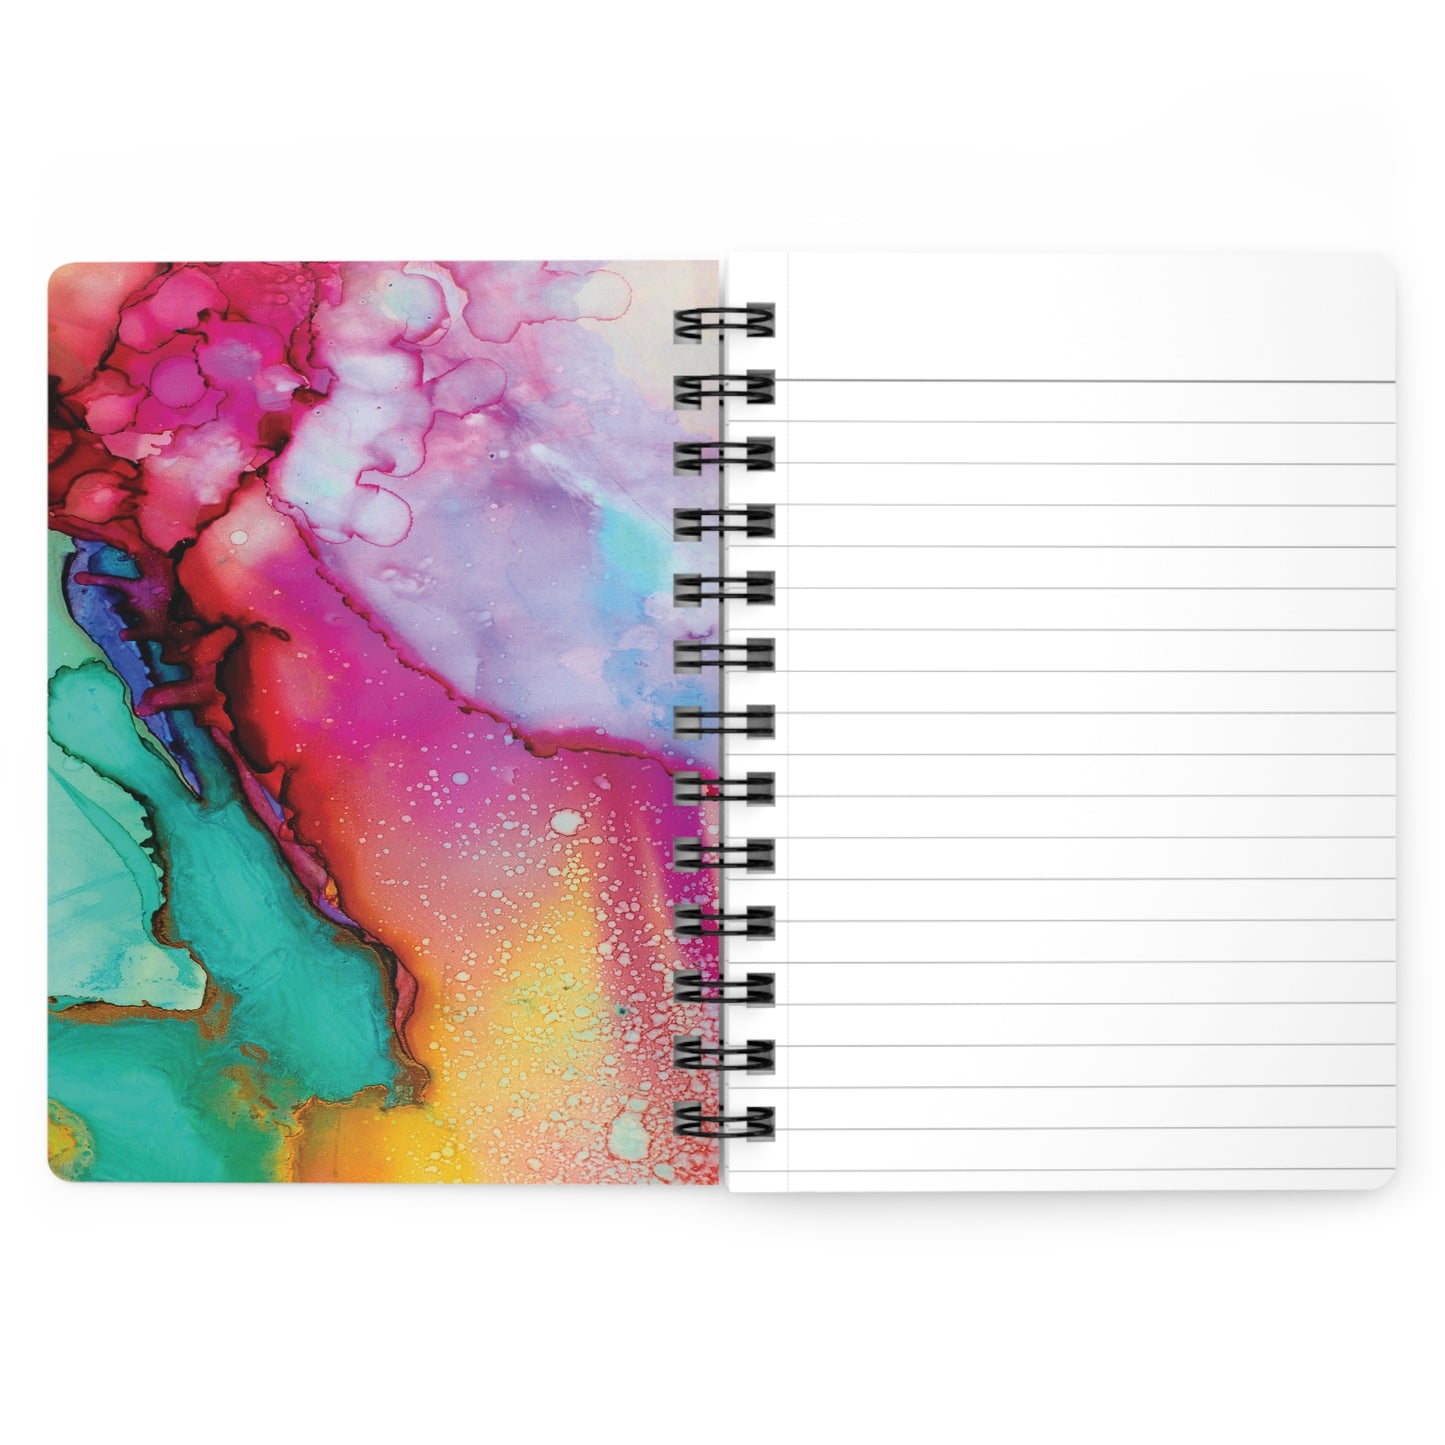 Personalized Spiral Bound Journal with Abstract Design